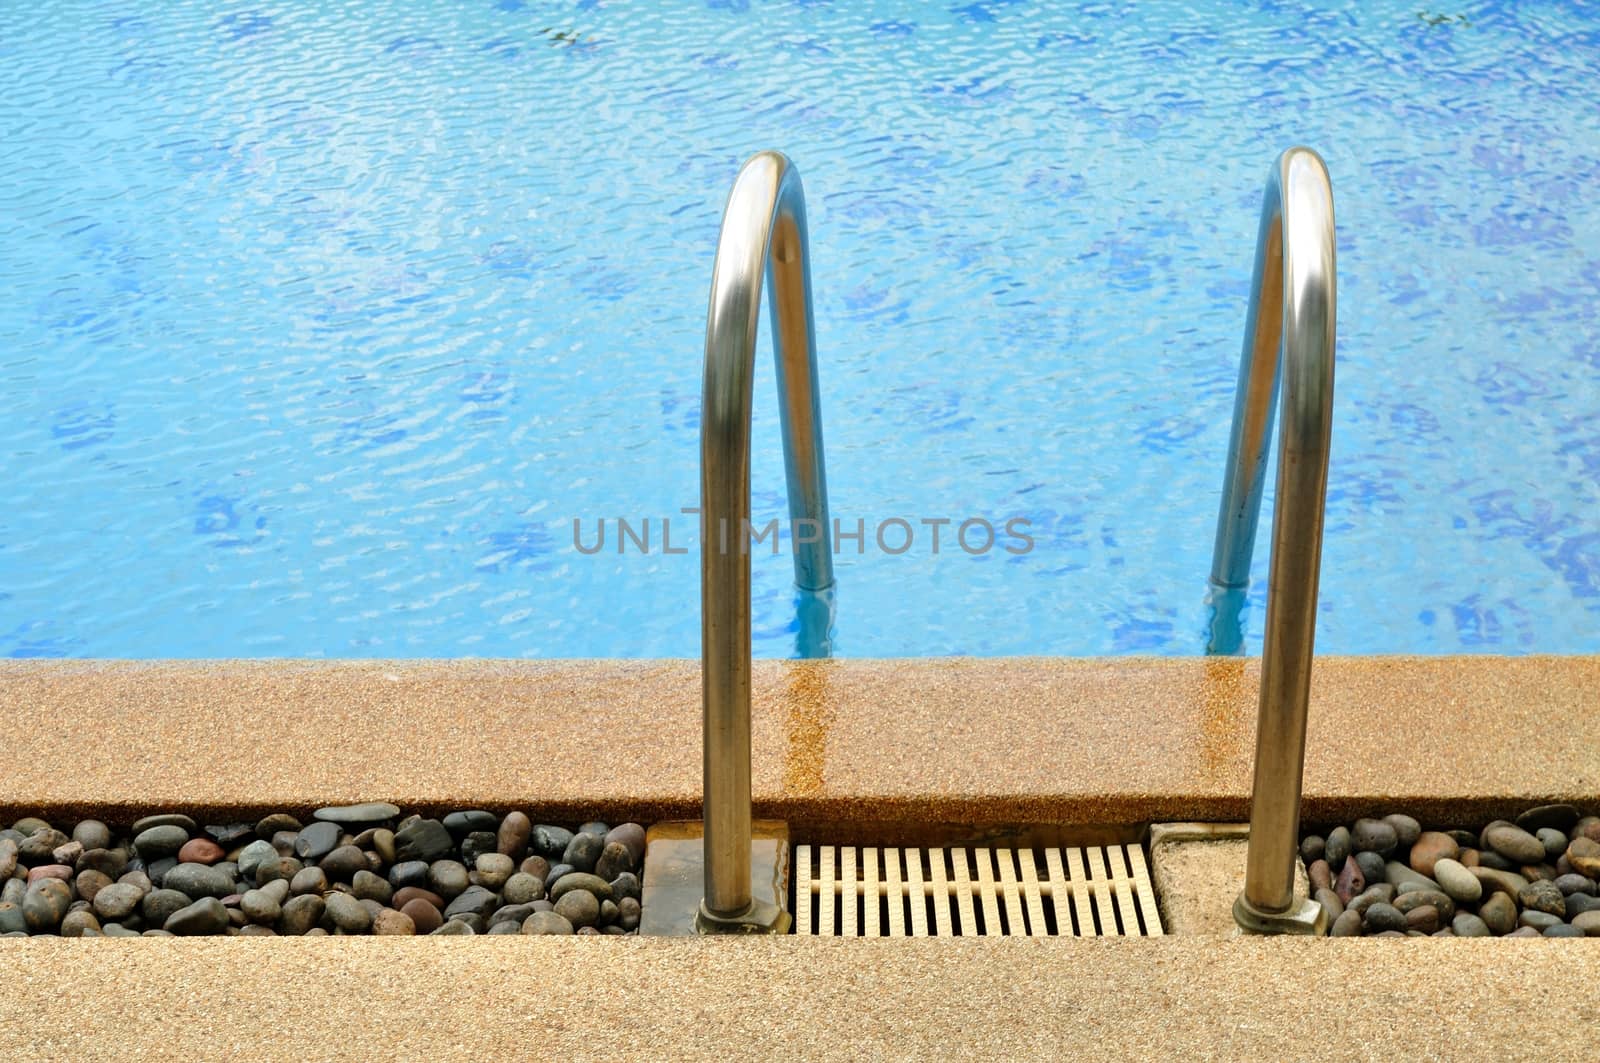 swimming pool with stair or ladder